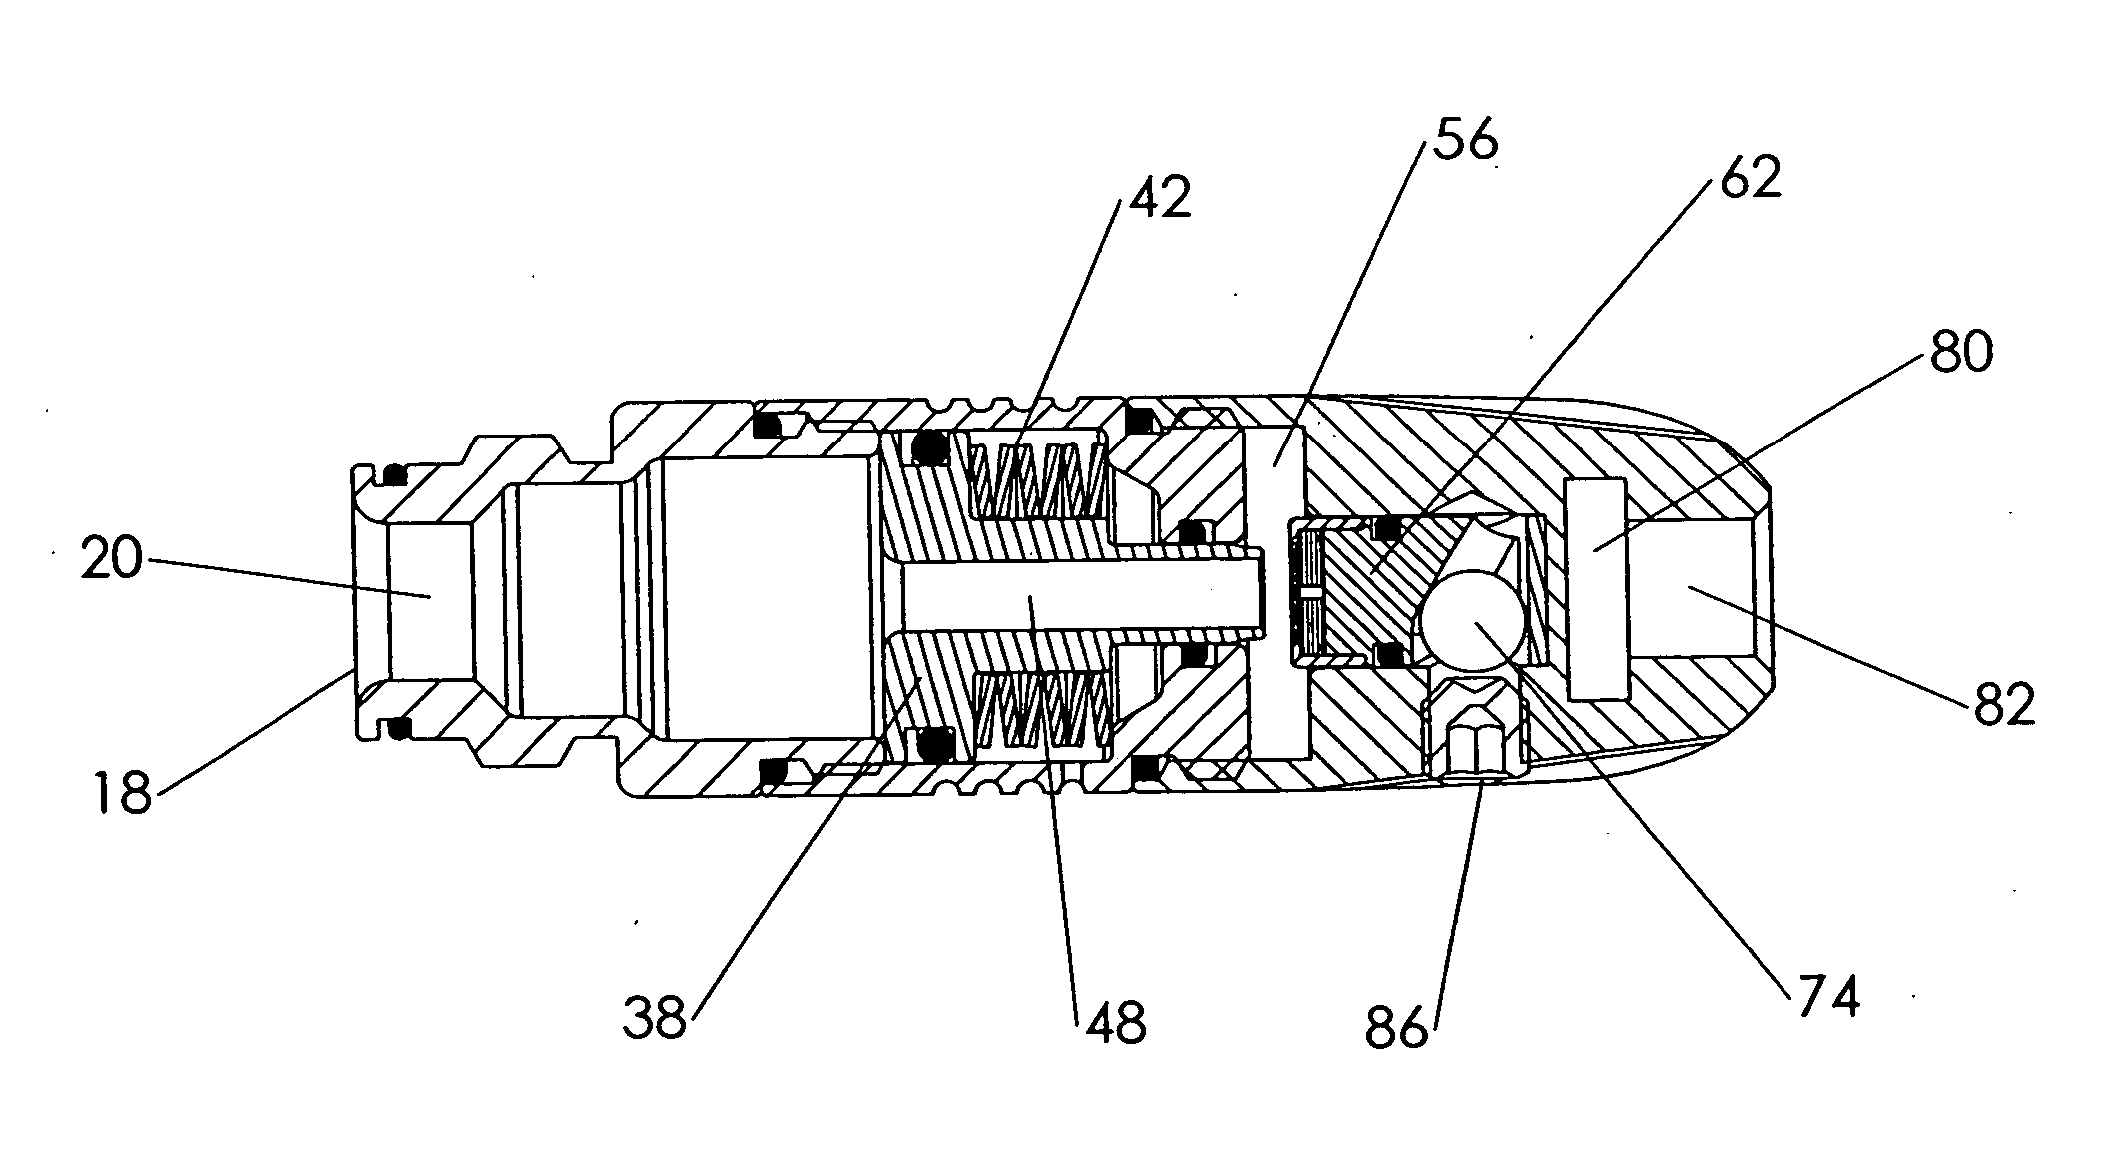 Method and apparatus for pneumatic regulation including a high-pressure reserve